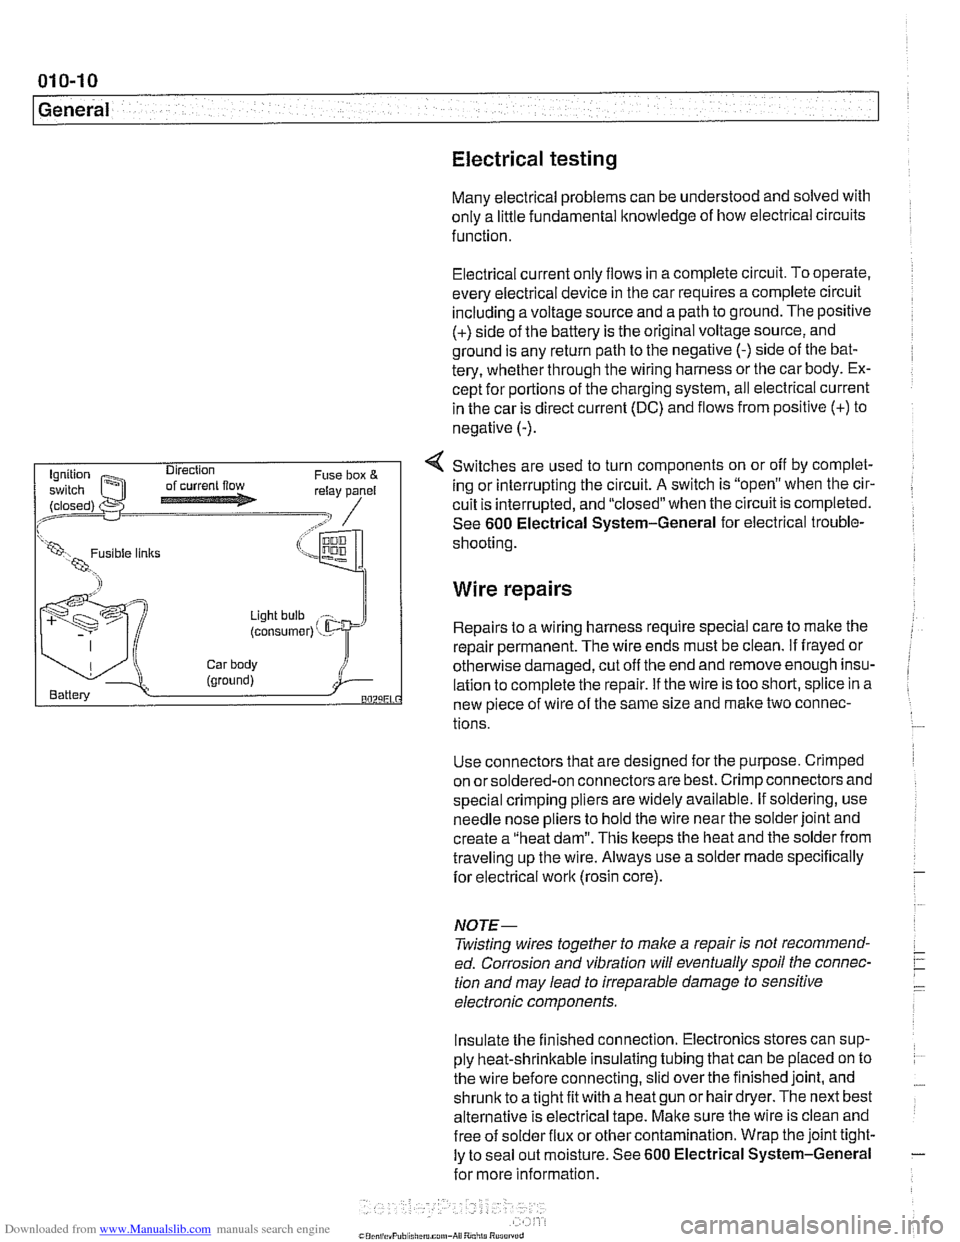 BMW 525i 1997 E39 Workshop Manual Downloaded from www.Manualslib.com manuals search engine 
01 0-1 0 
General 
Electrical testing 
Many electrical problems  can be understood and solved with 
only a little fundamental  knowledge  of h